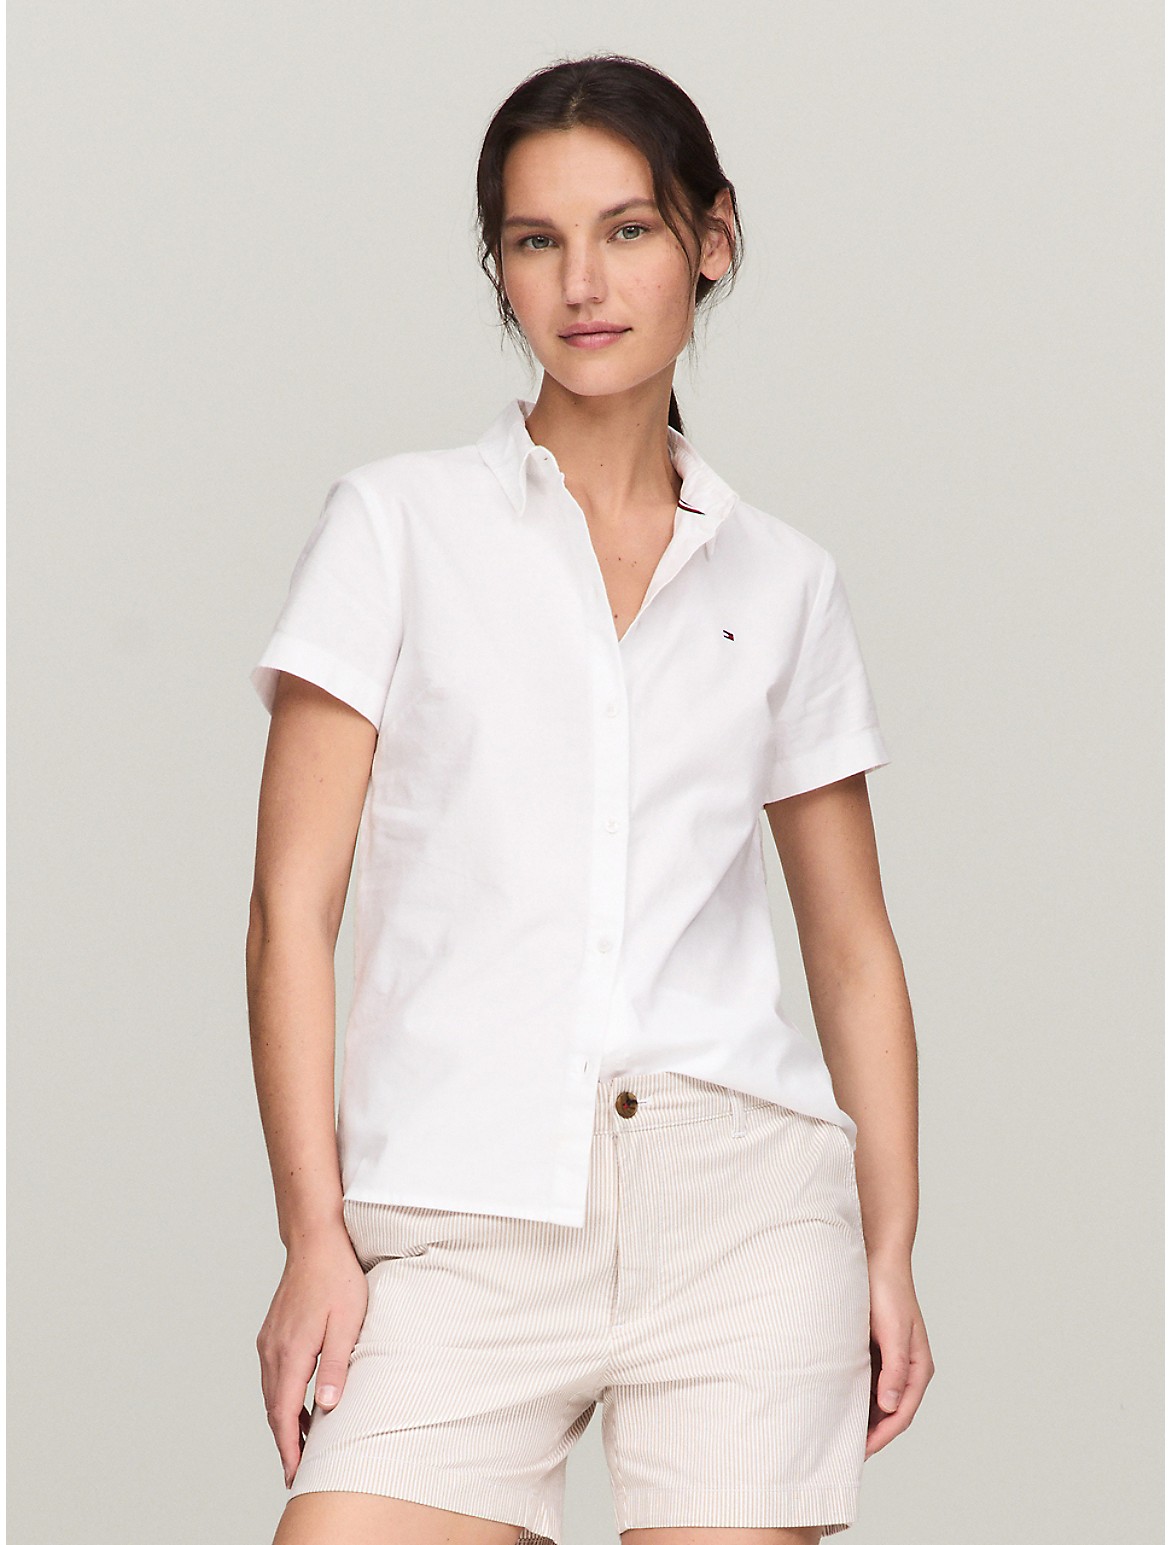 Tommy Hilfiger Women's Relaxed Fit Solid Oxford Shirt - White - XL